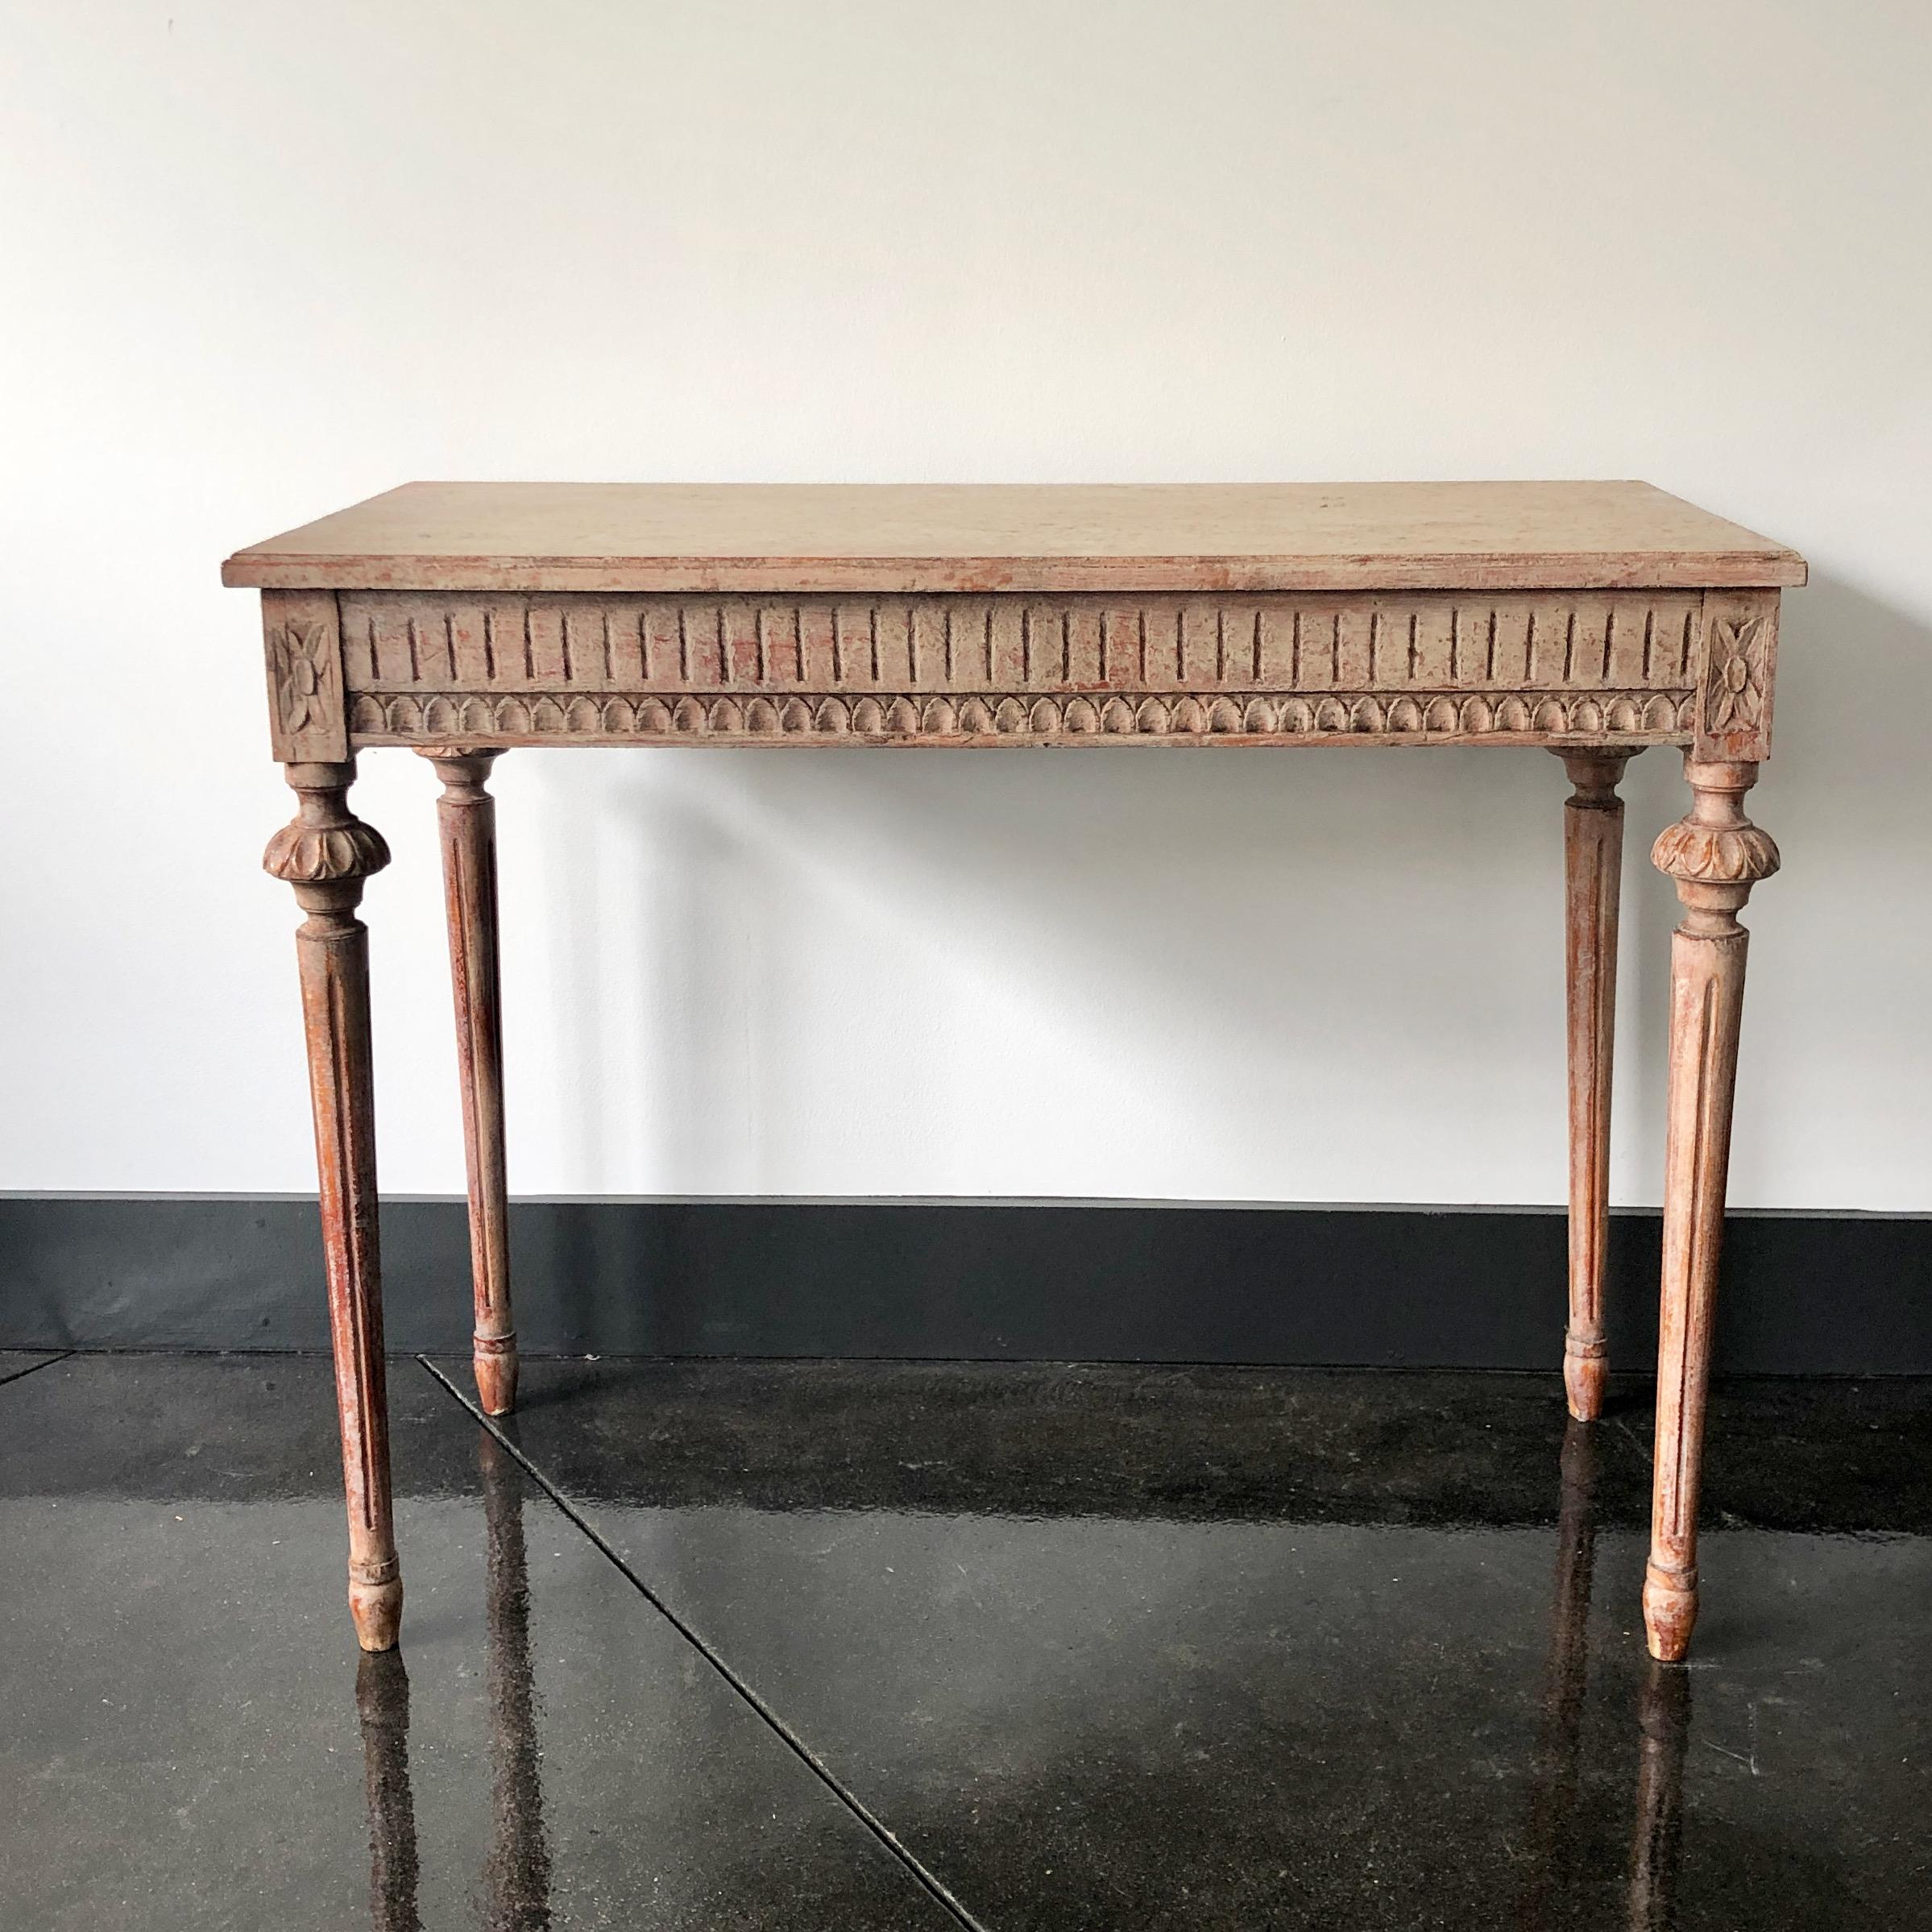 Early 19th century Swedish Gustavian freestanding period console table with richly decorated with carvings to sides of apron and wonderful carved tapered and fluted feet beneath flower motifs
Stockholm, Sweden, circa 1810.